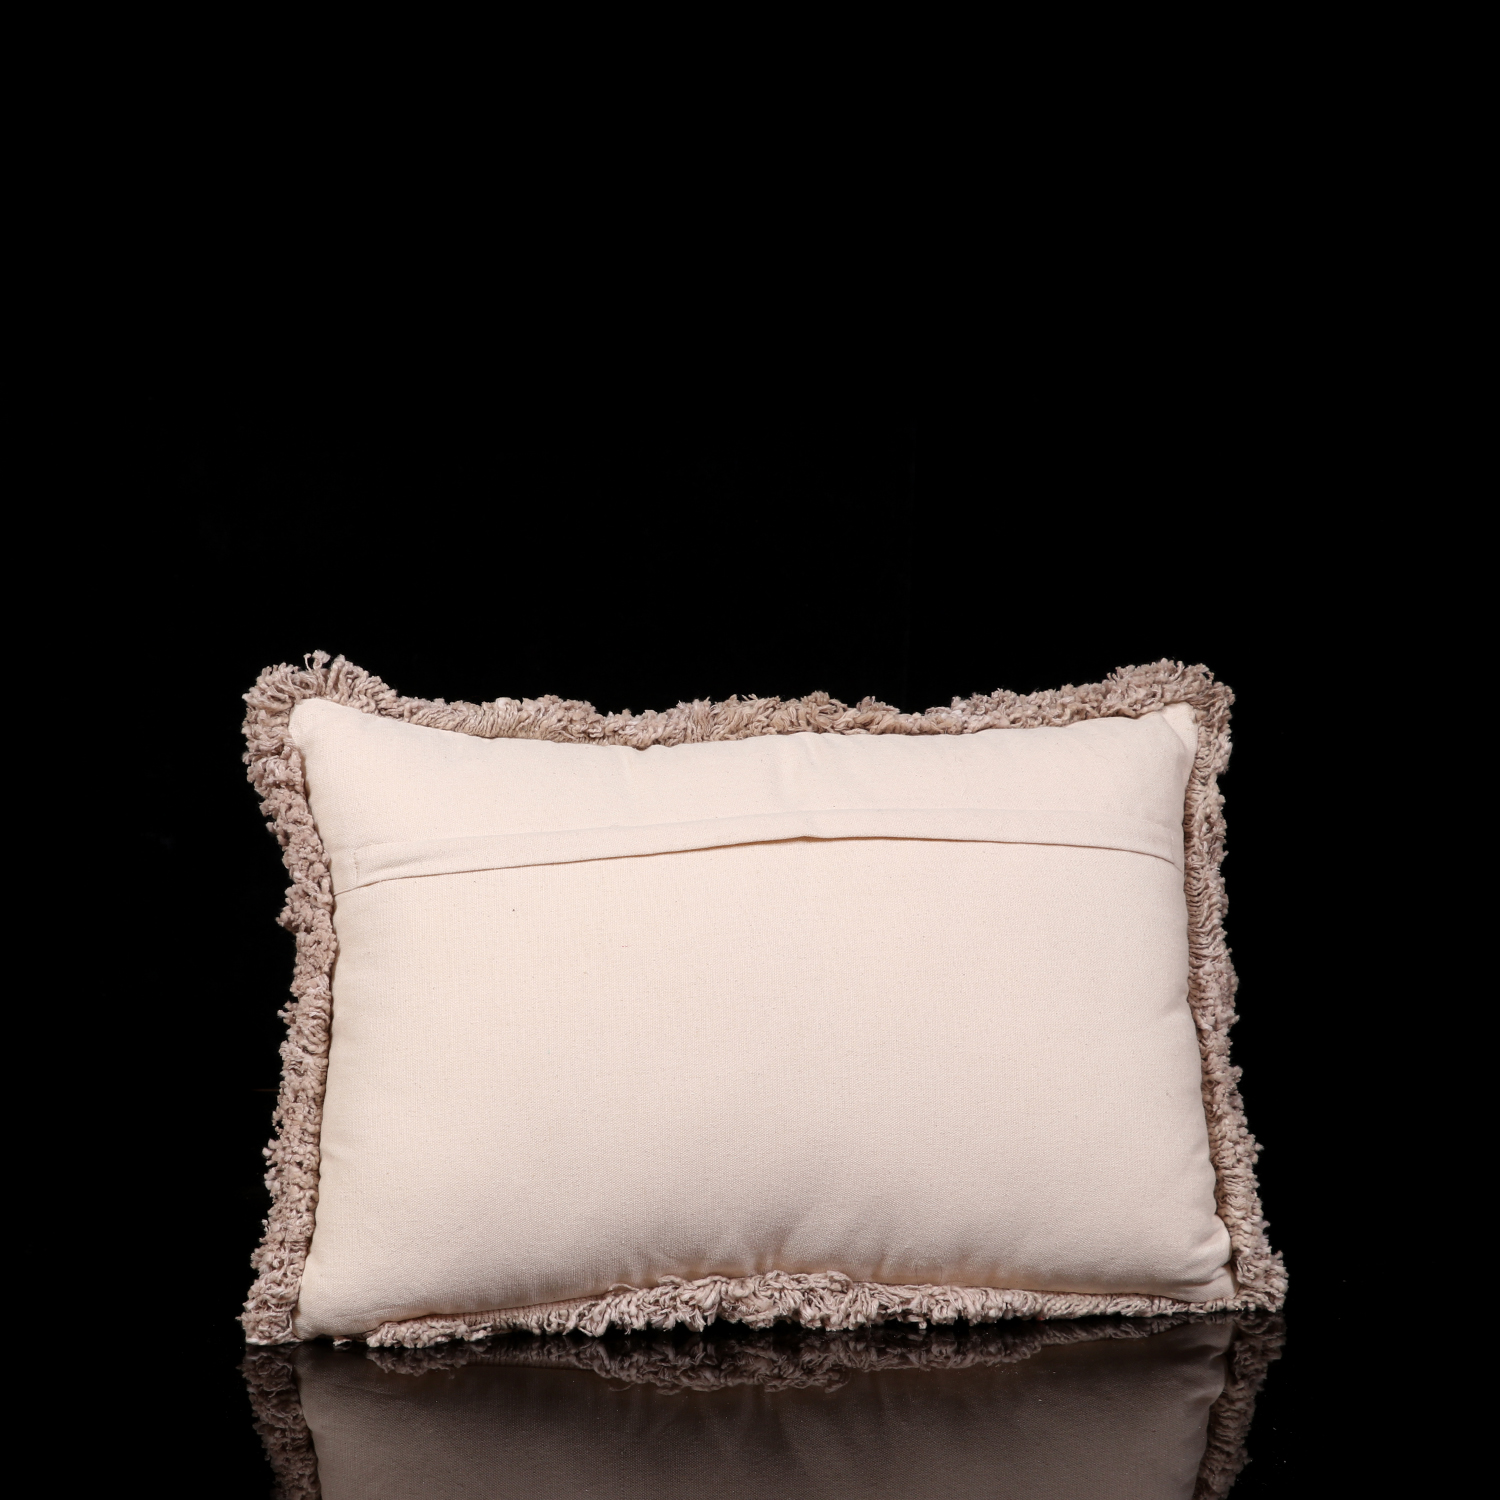 TEXTURED PRINTED PILLOW FRINGES